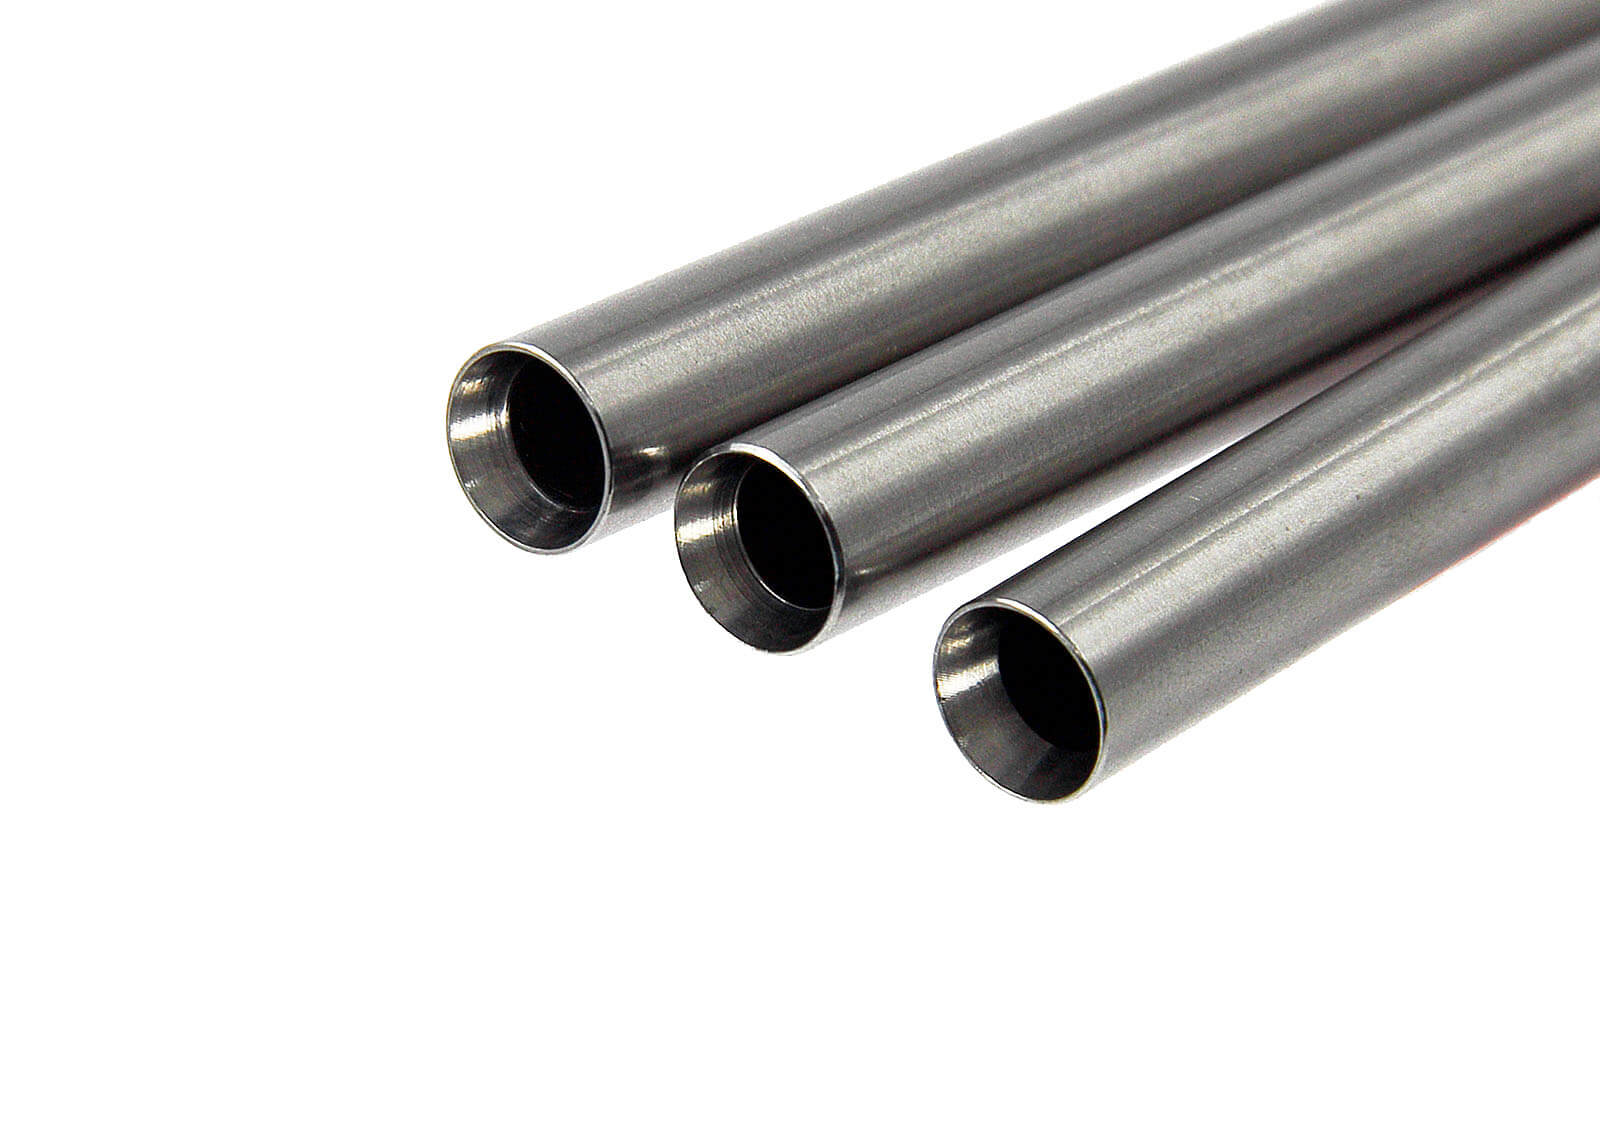 Stainless Steel 6.03mm Precision GBB Inner Barrel 100mm - Modify Airsoft Parts